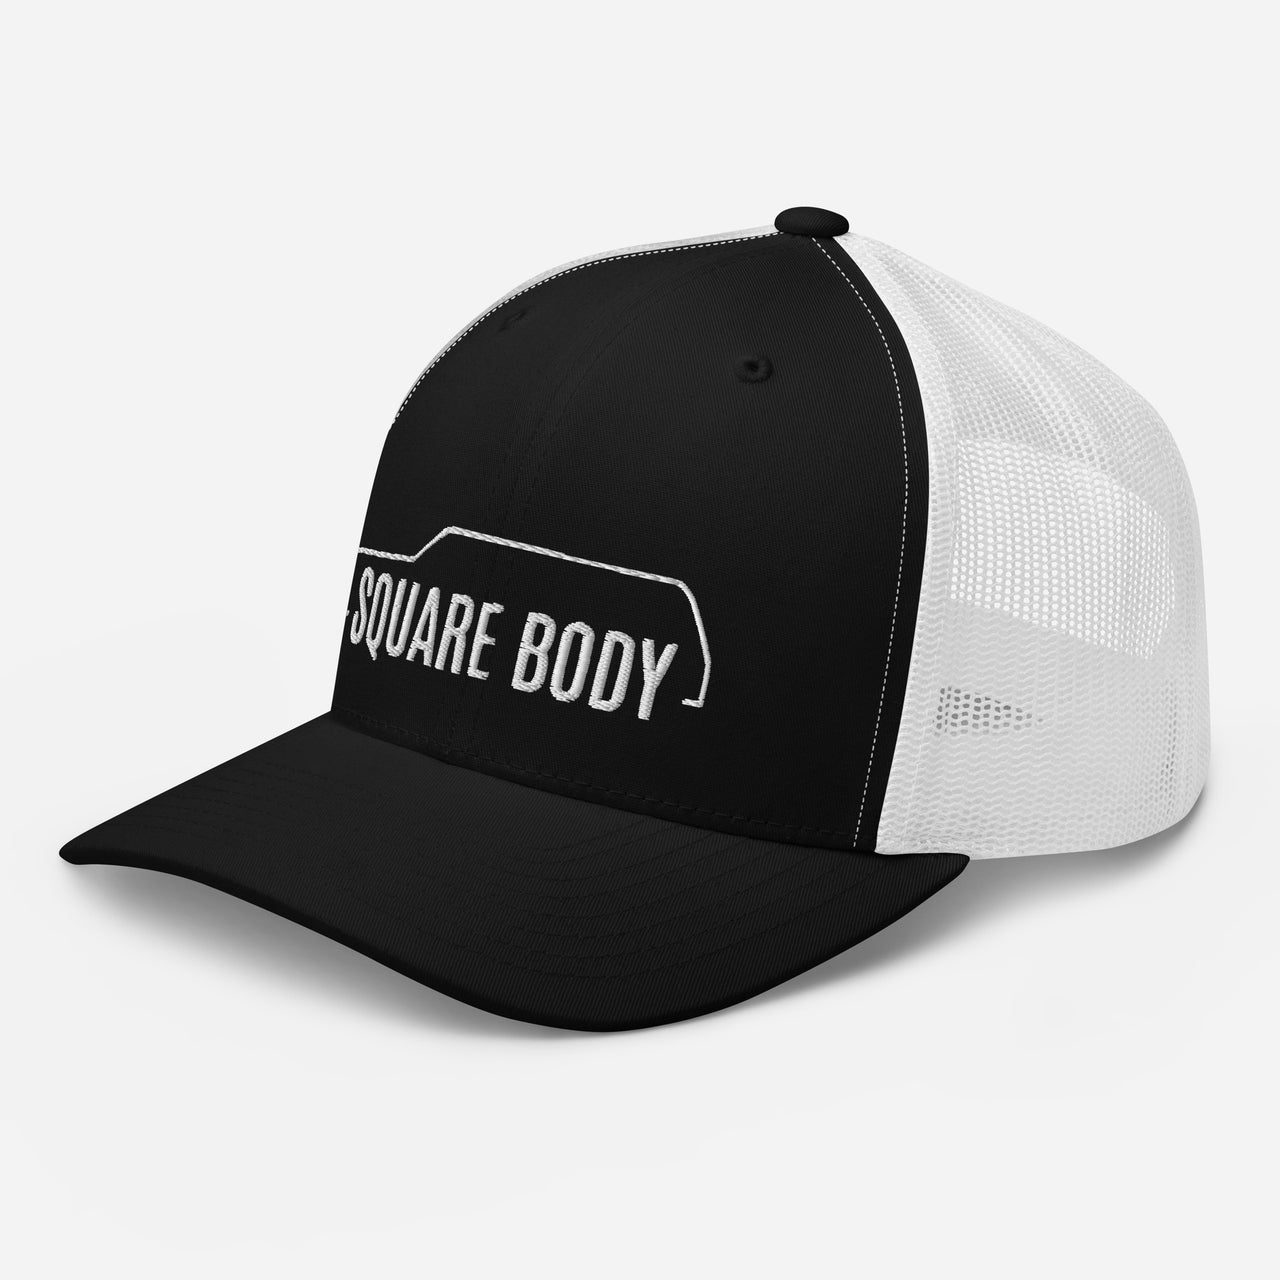 3/4 view of a square body suburban trucker hat from aggressive thread in black and white